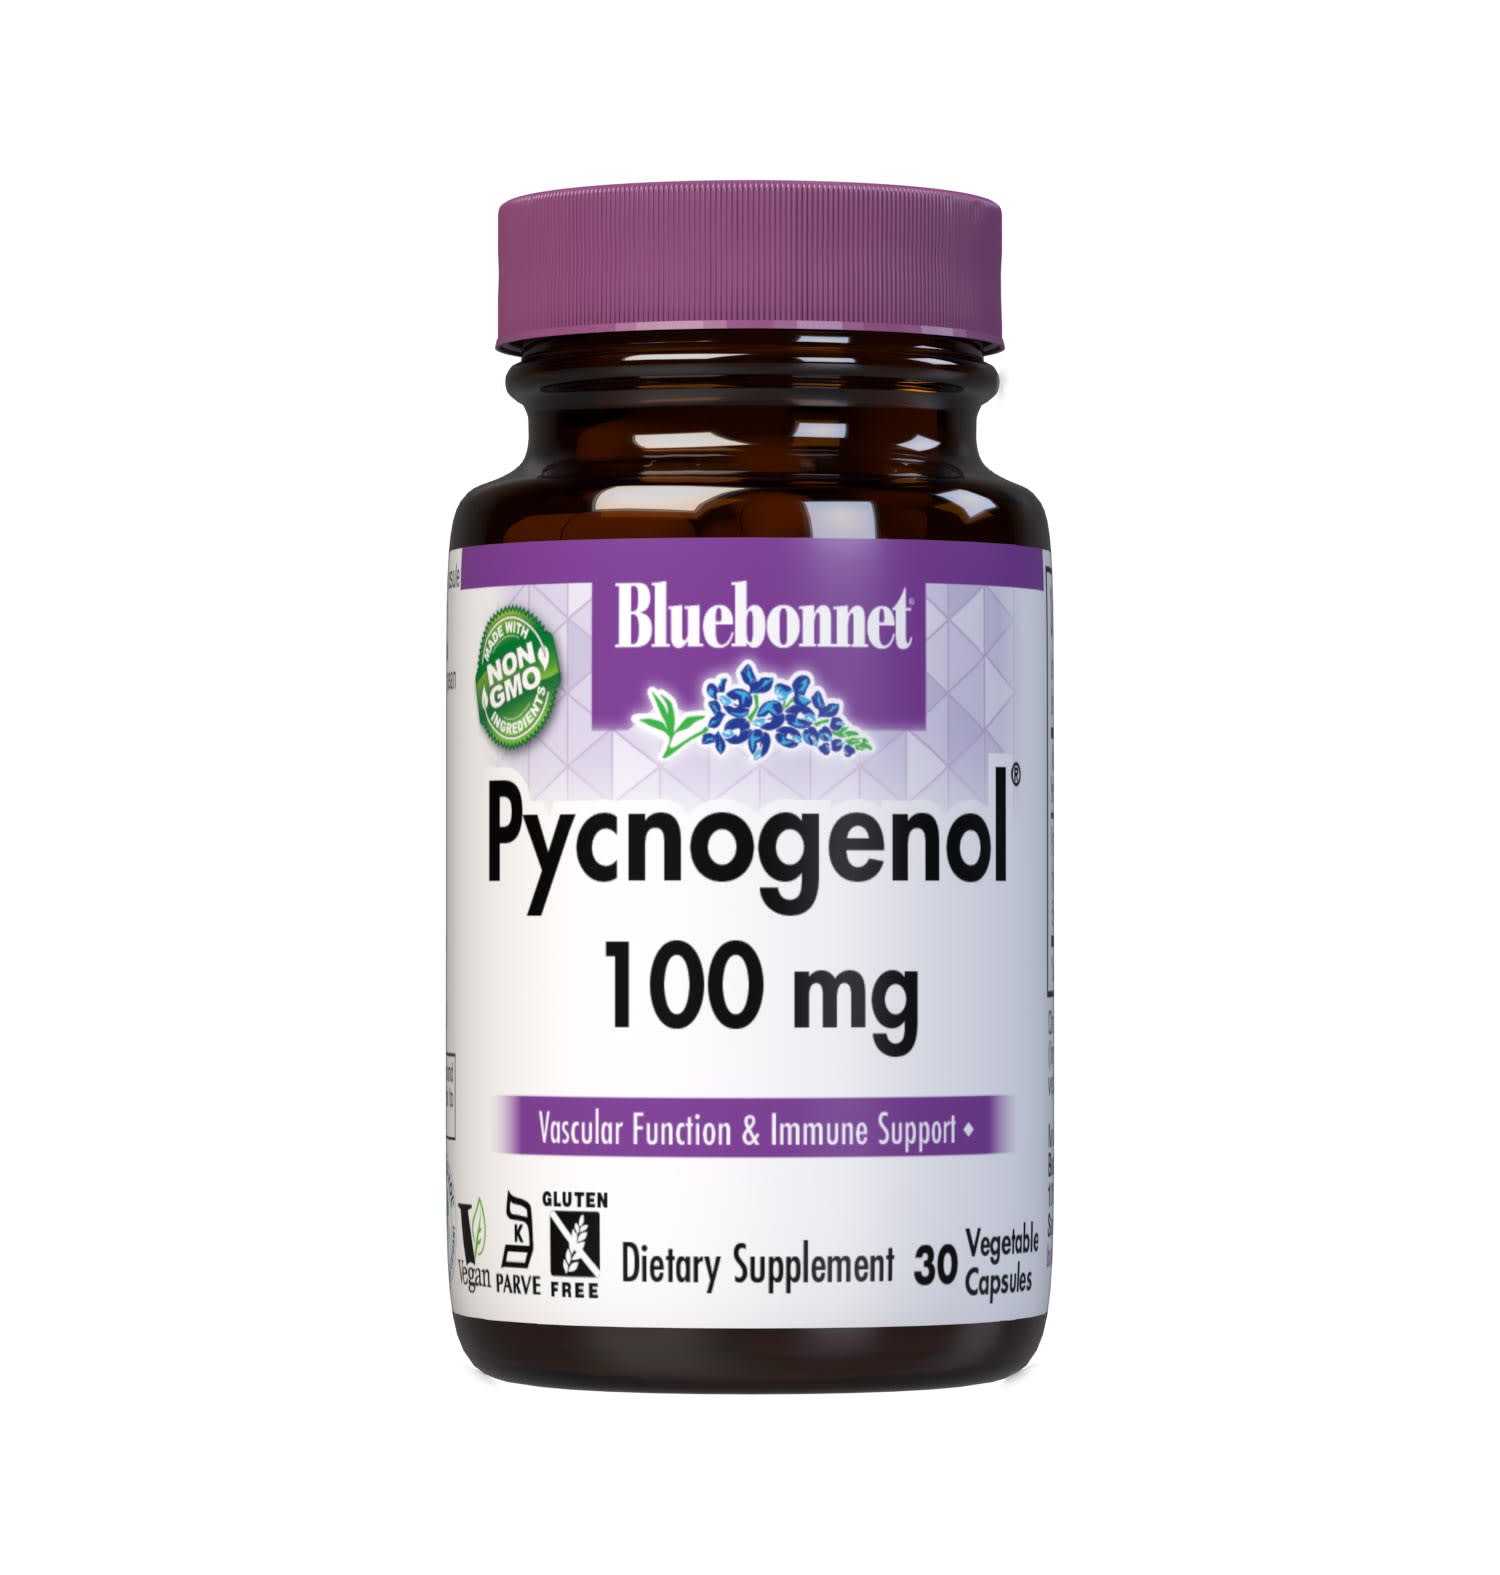 Bluebonnet’s Pycnogenol 100 mg 30 Vegetable Capsules are derived from the bark of the European coastal pine, Pinus maritima. Pycnogenol is a plant extract concentrated with oligomeric proanthocyanidins (OPCs), a water-soluble bioflavonoid. Pycnogenol may help support vascular and immune function. #size_30 count